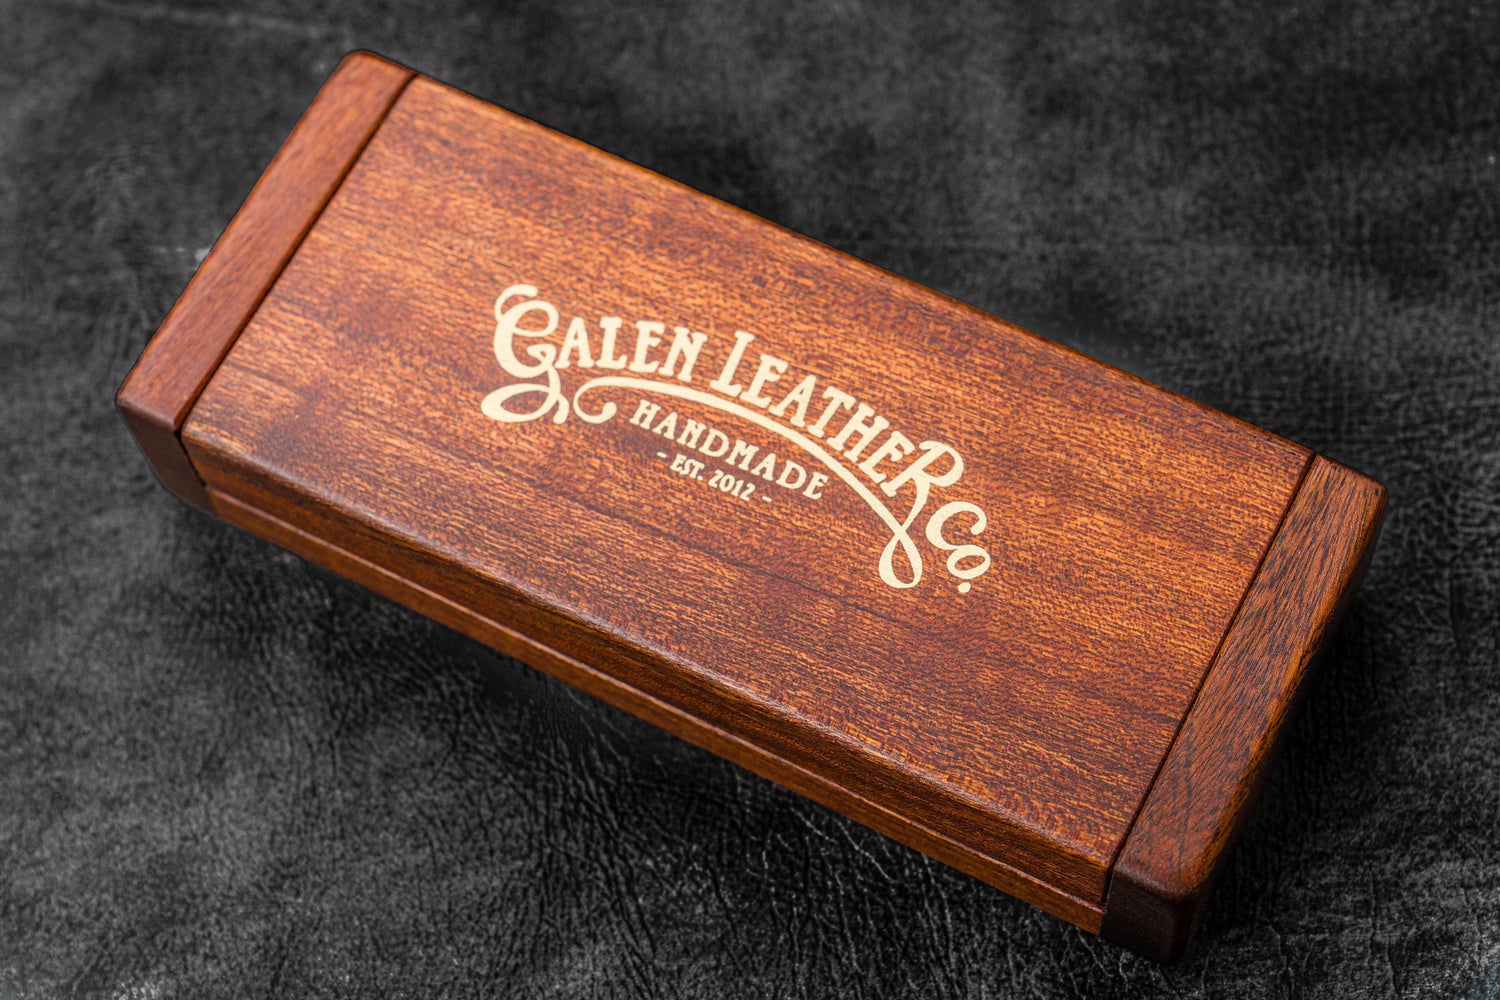 Galen Leather Co Wooden Pen Display Case with Lid